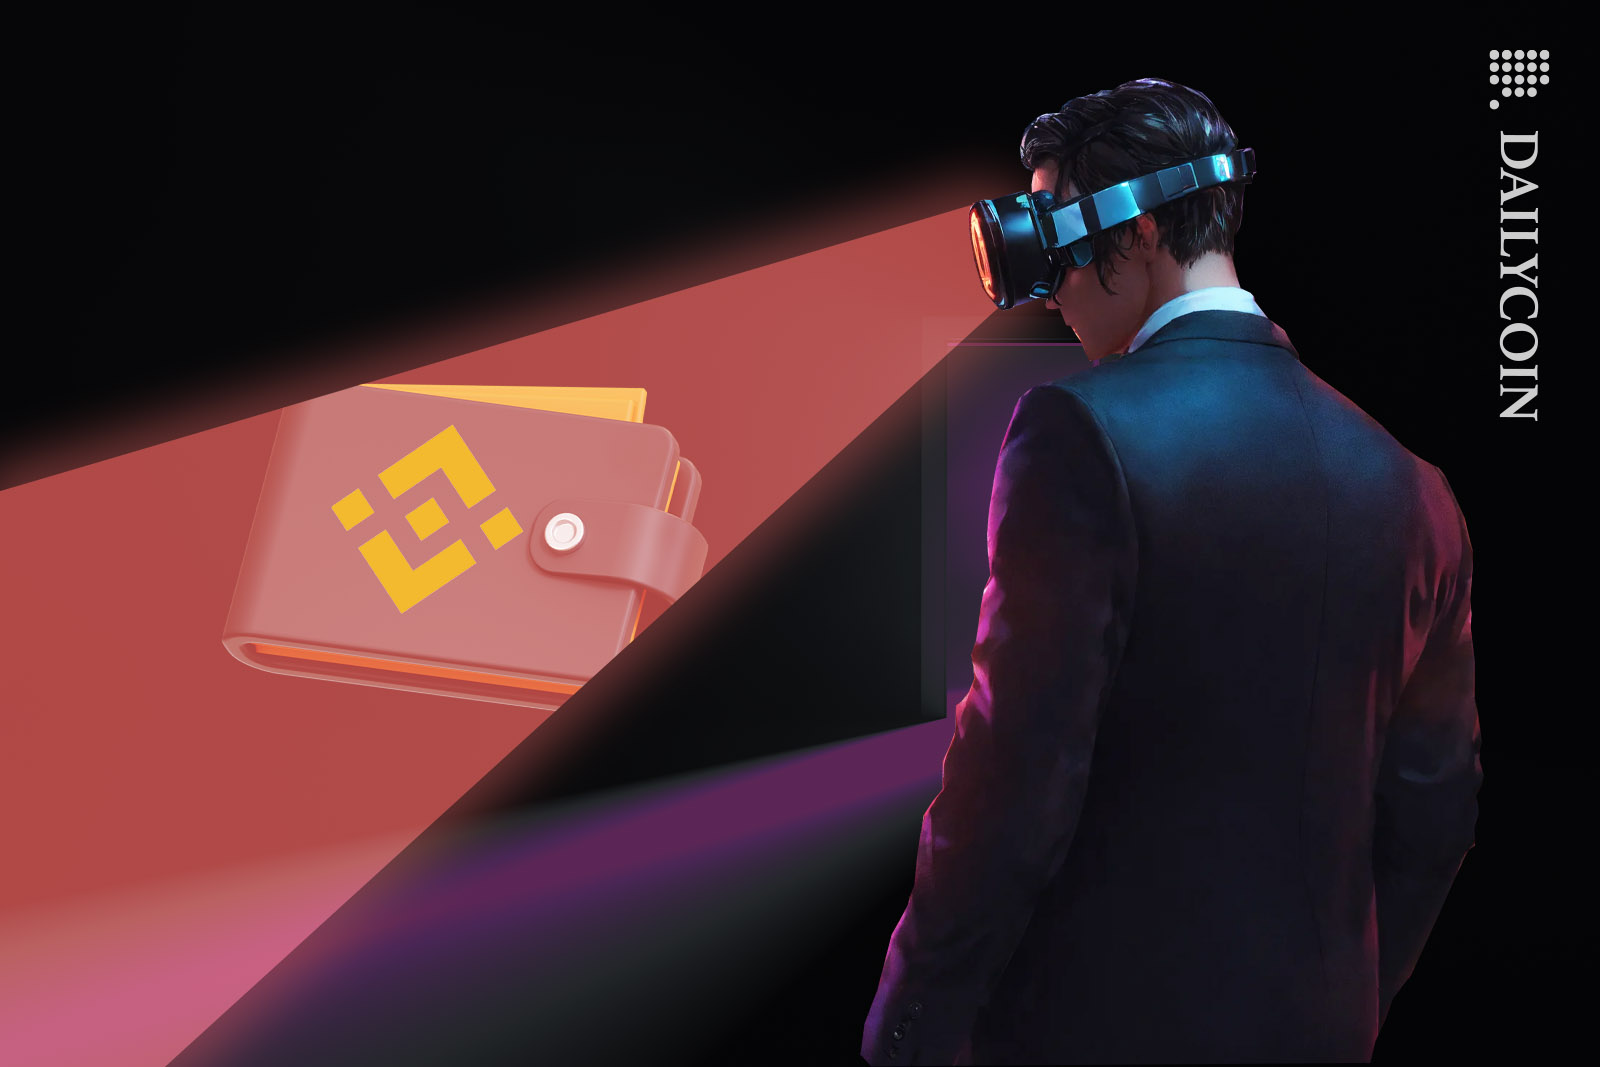 Detective with VR headset examining a Binance wallet.